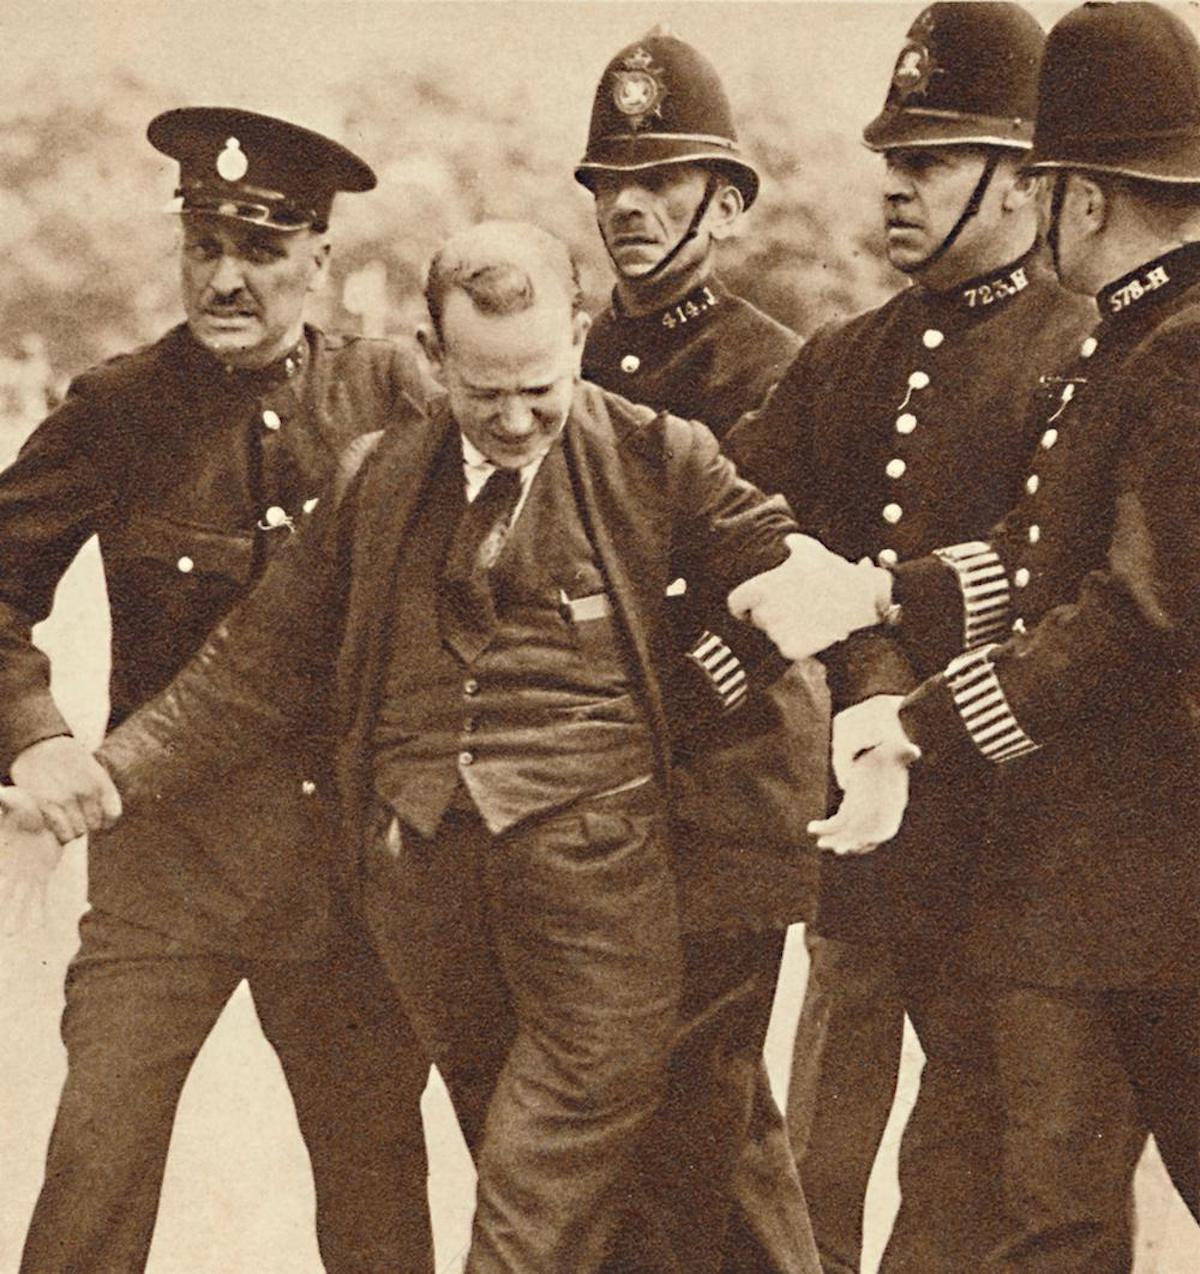 George McMahon under arrest after pulling a loaded revolver on Edward VIII, Constitution Hill, London, 16 July 1936. John Frost Newspapers/Alamy Stock Photo